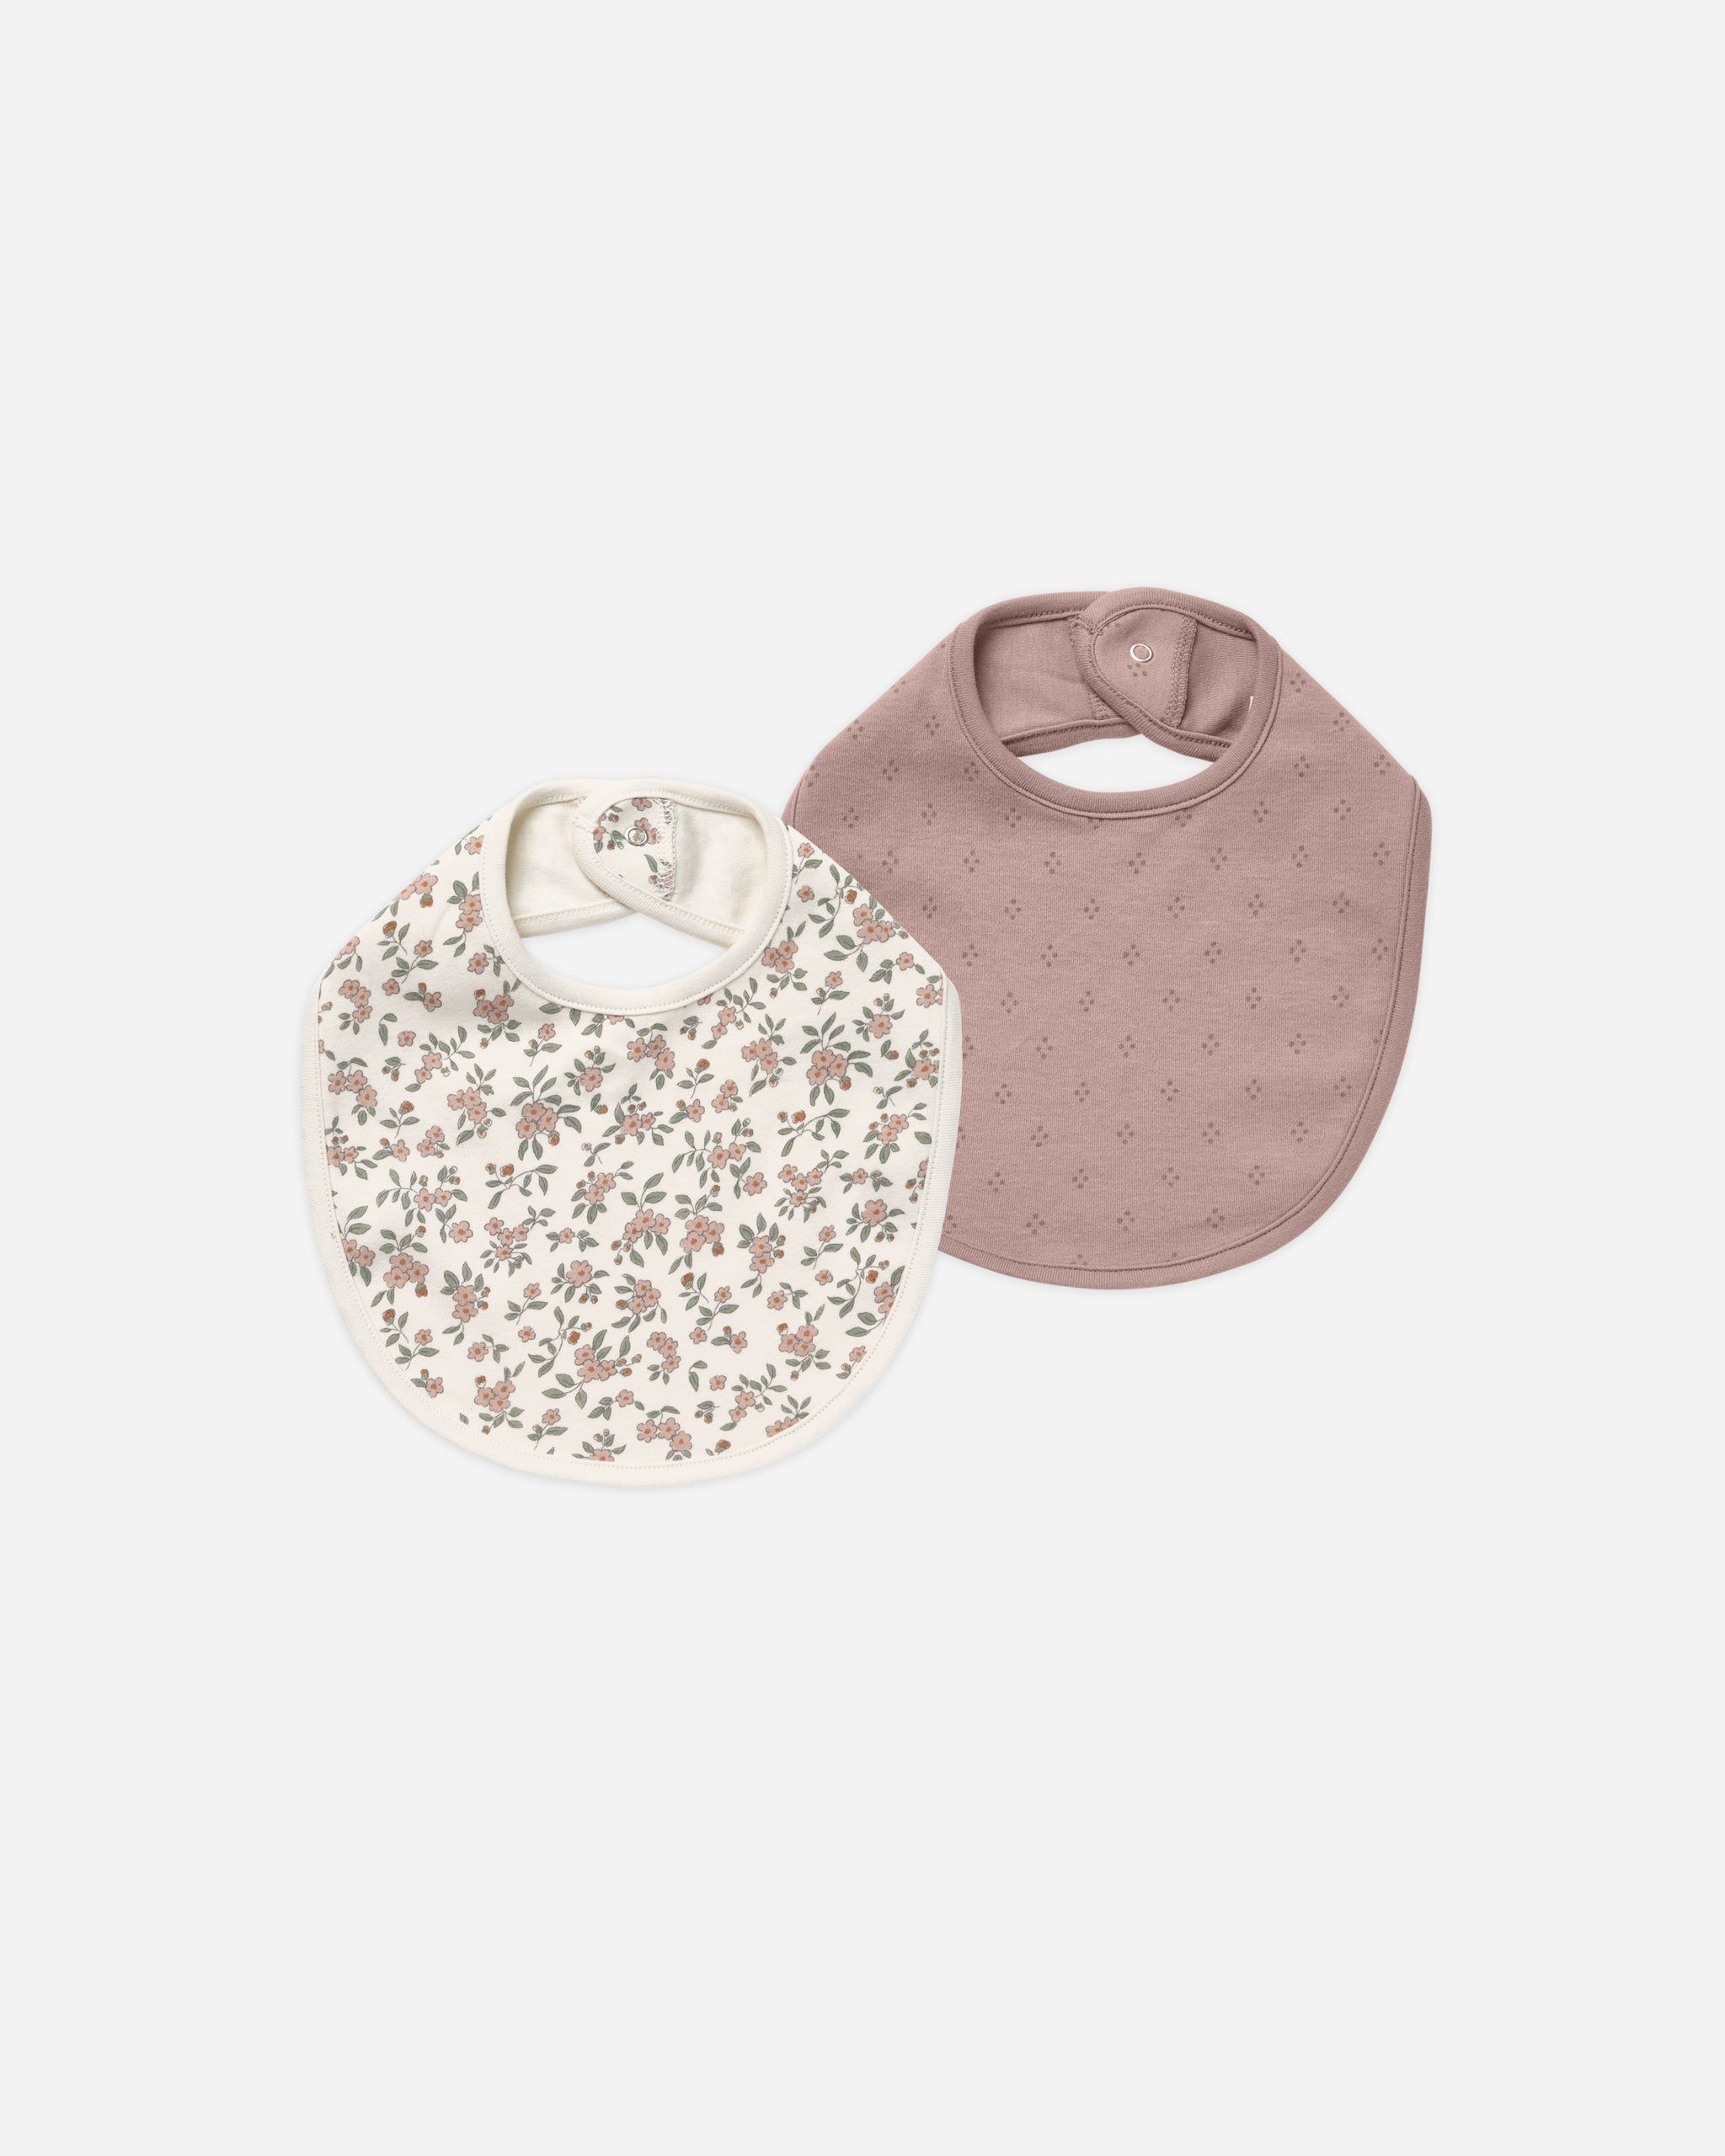 Jersey Snap Bib || Meadow, Dotty - Rylee + Cru | Kids Clothes | Trendy Baby Clothes | Modern Infant Outfits |